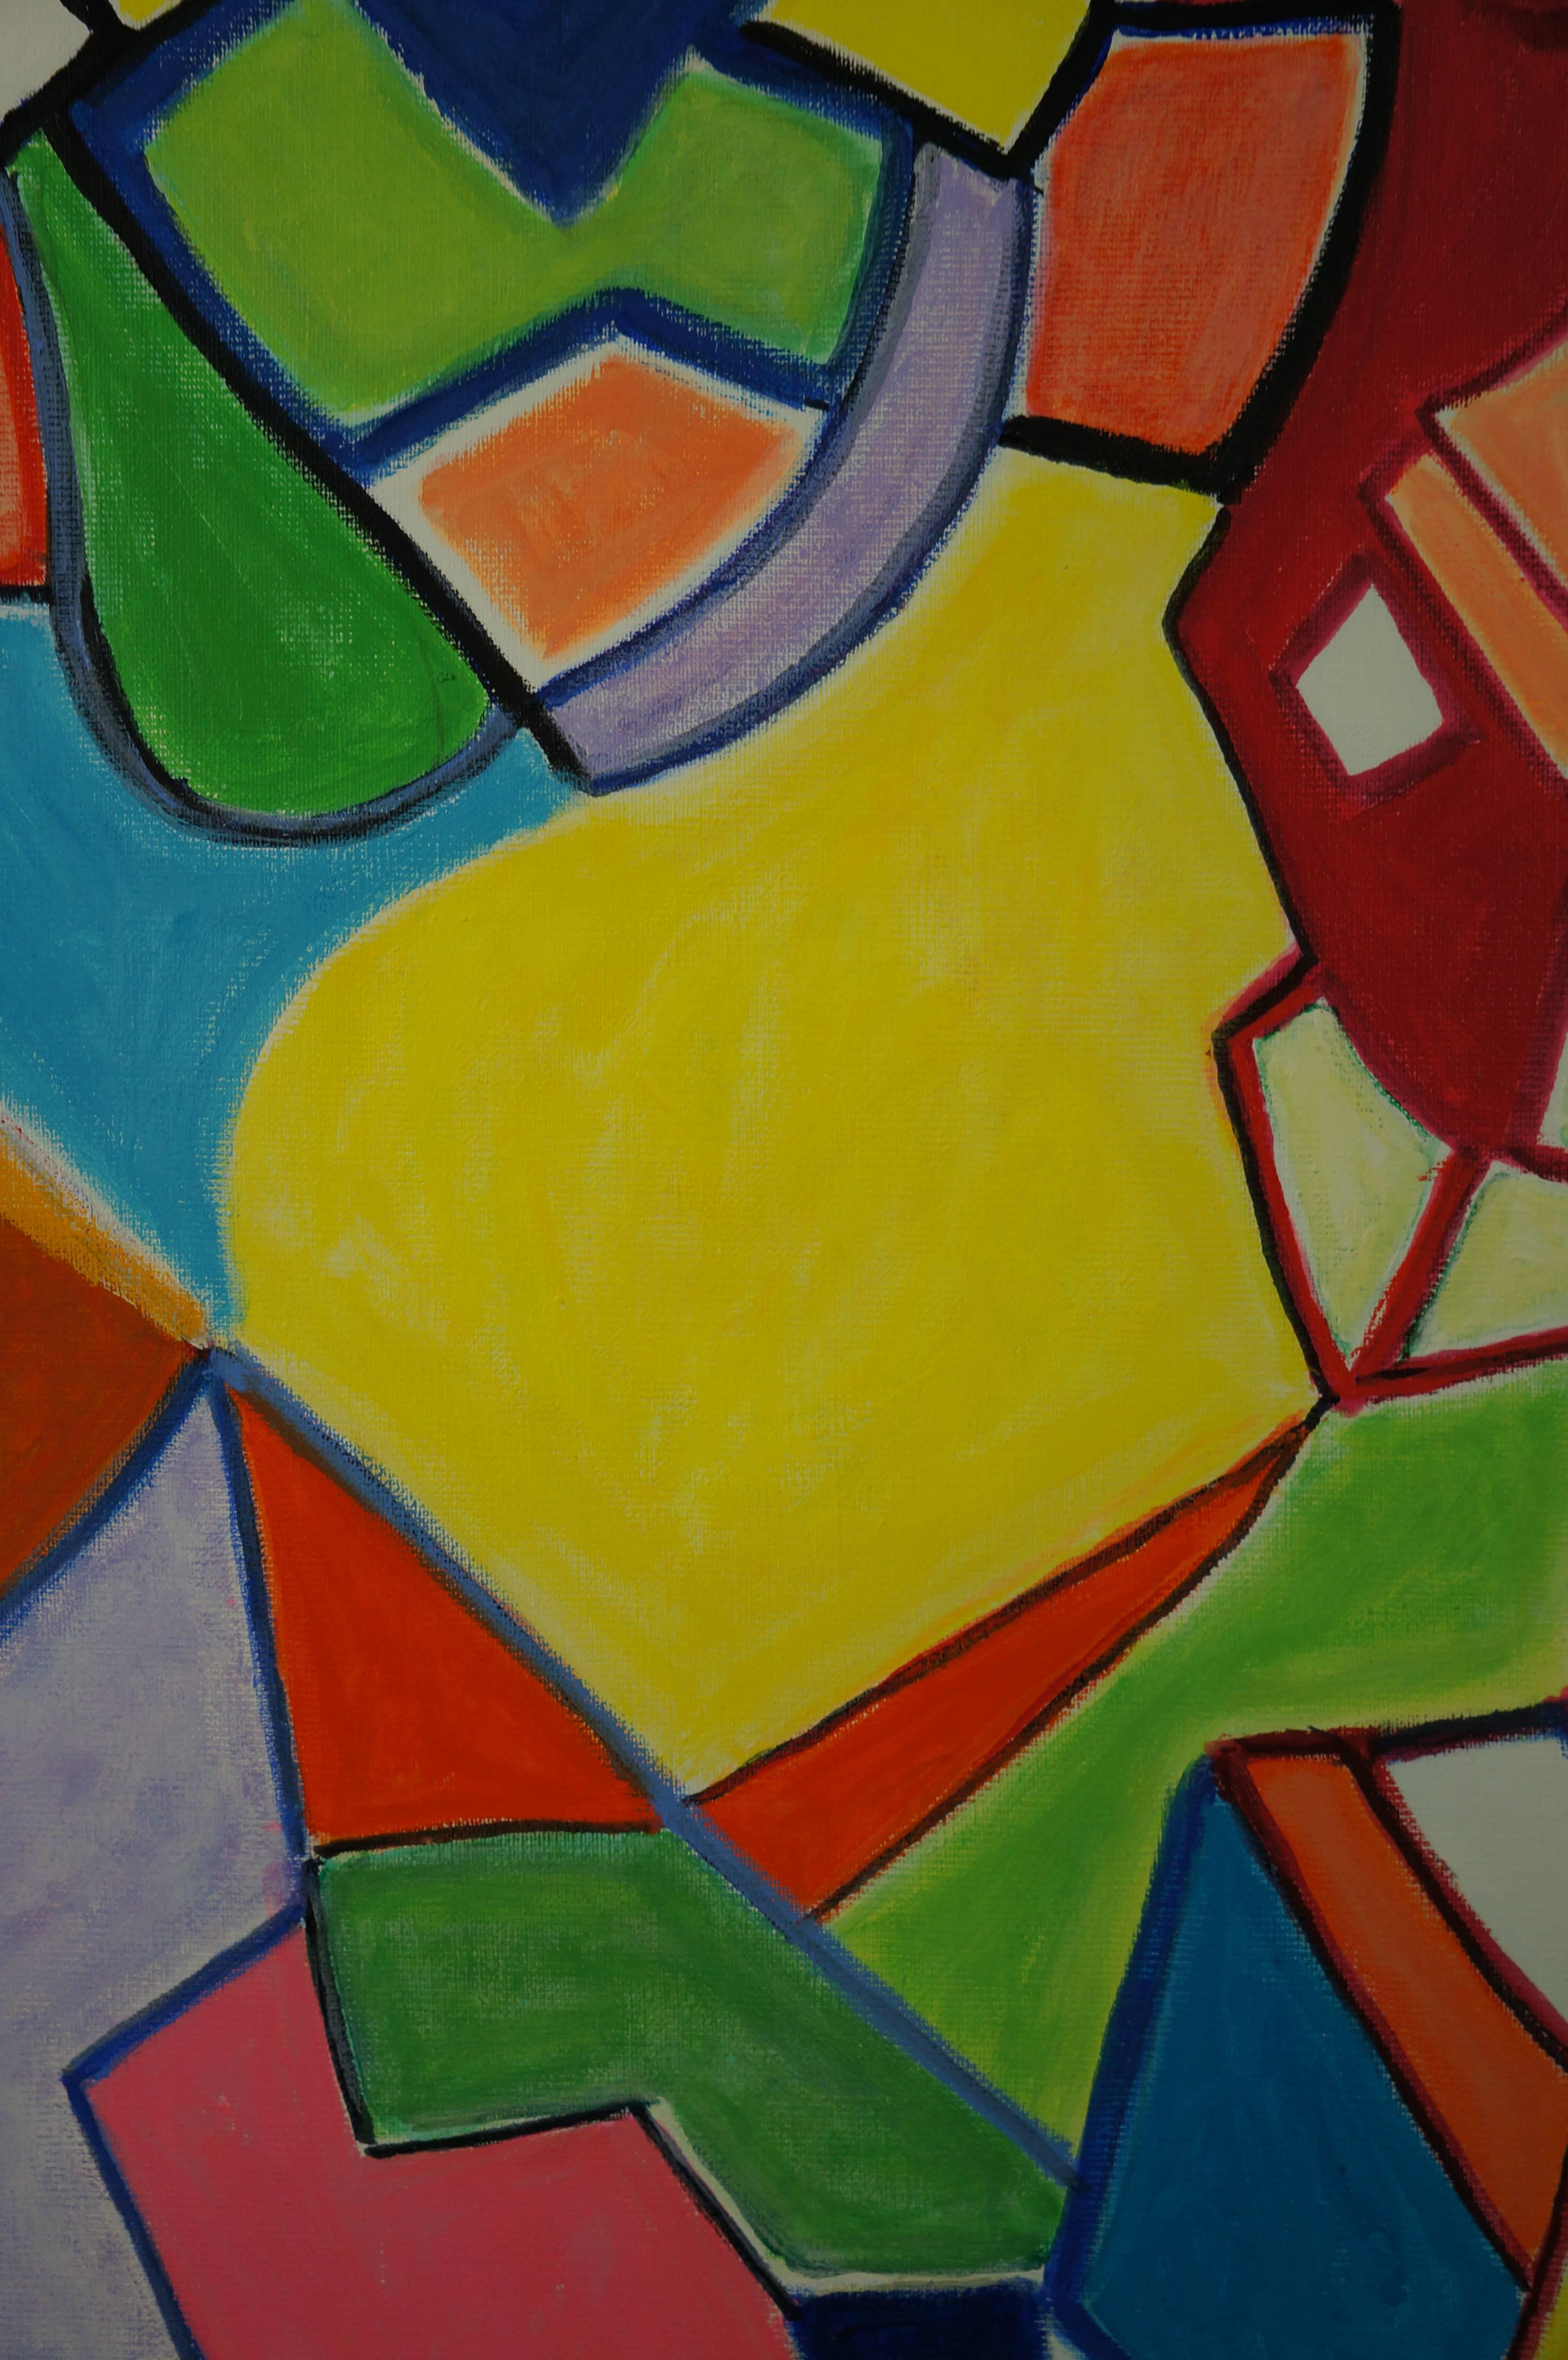 inorganic shapes in art examples